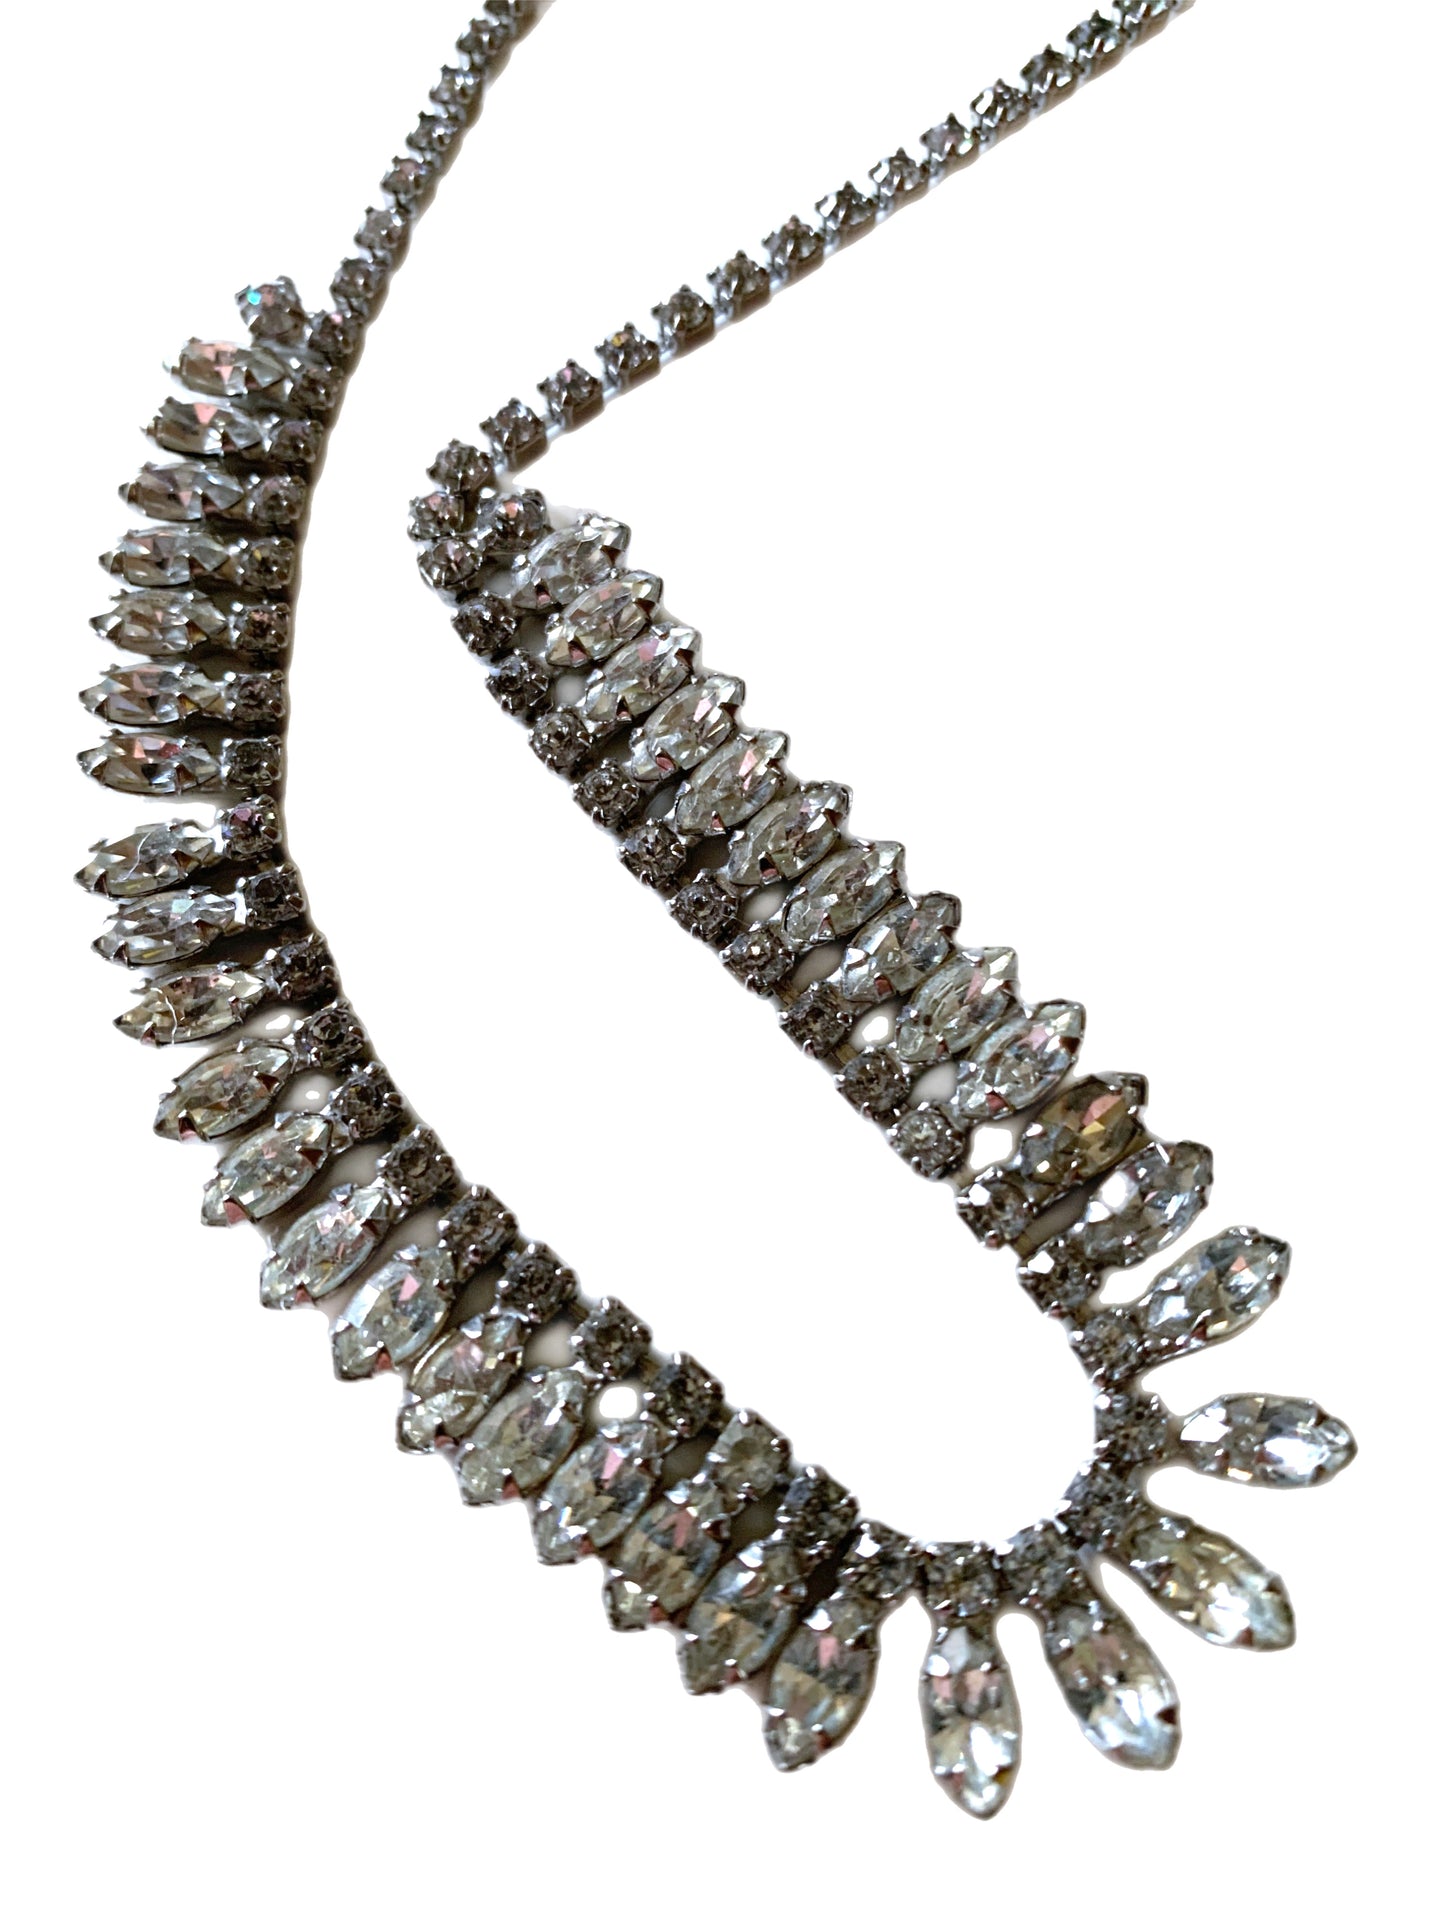 Clear Rhinestone Toothed Front Necklace circa 1950s